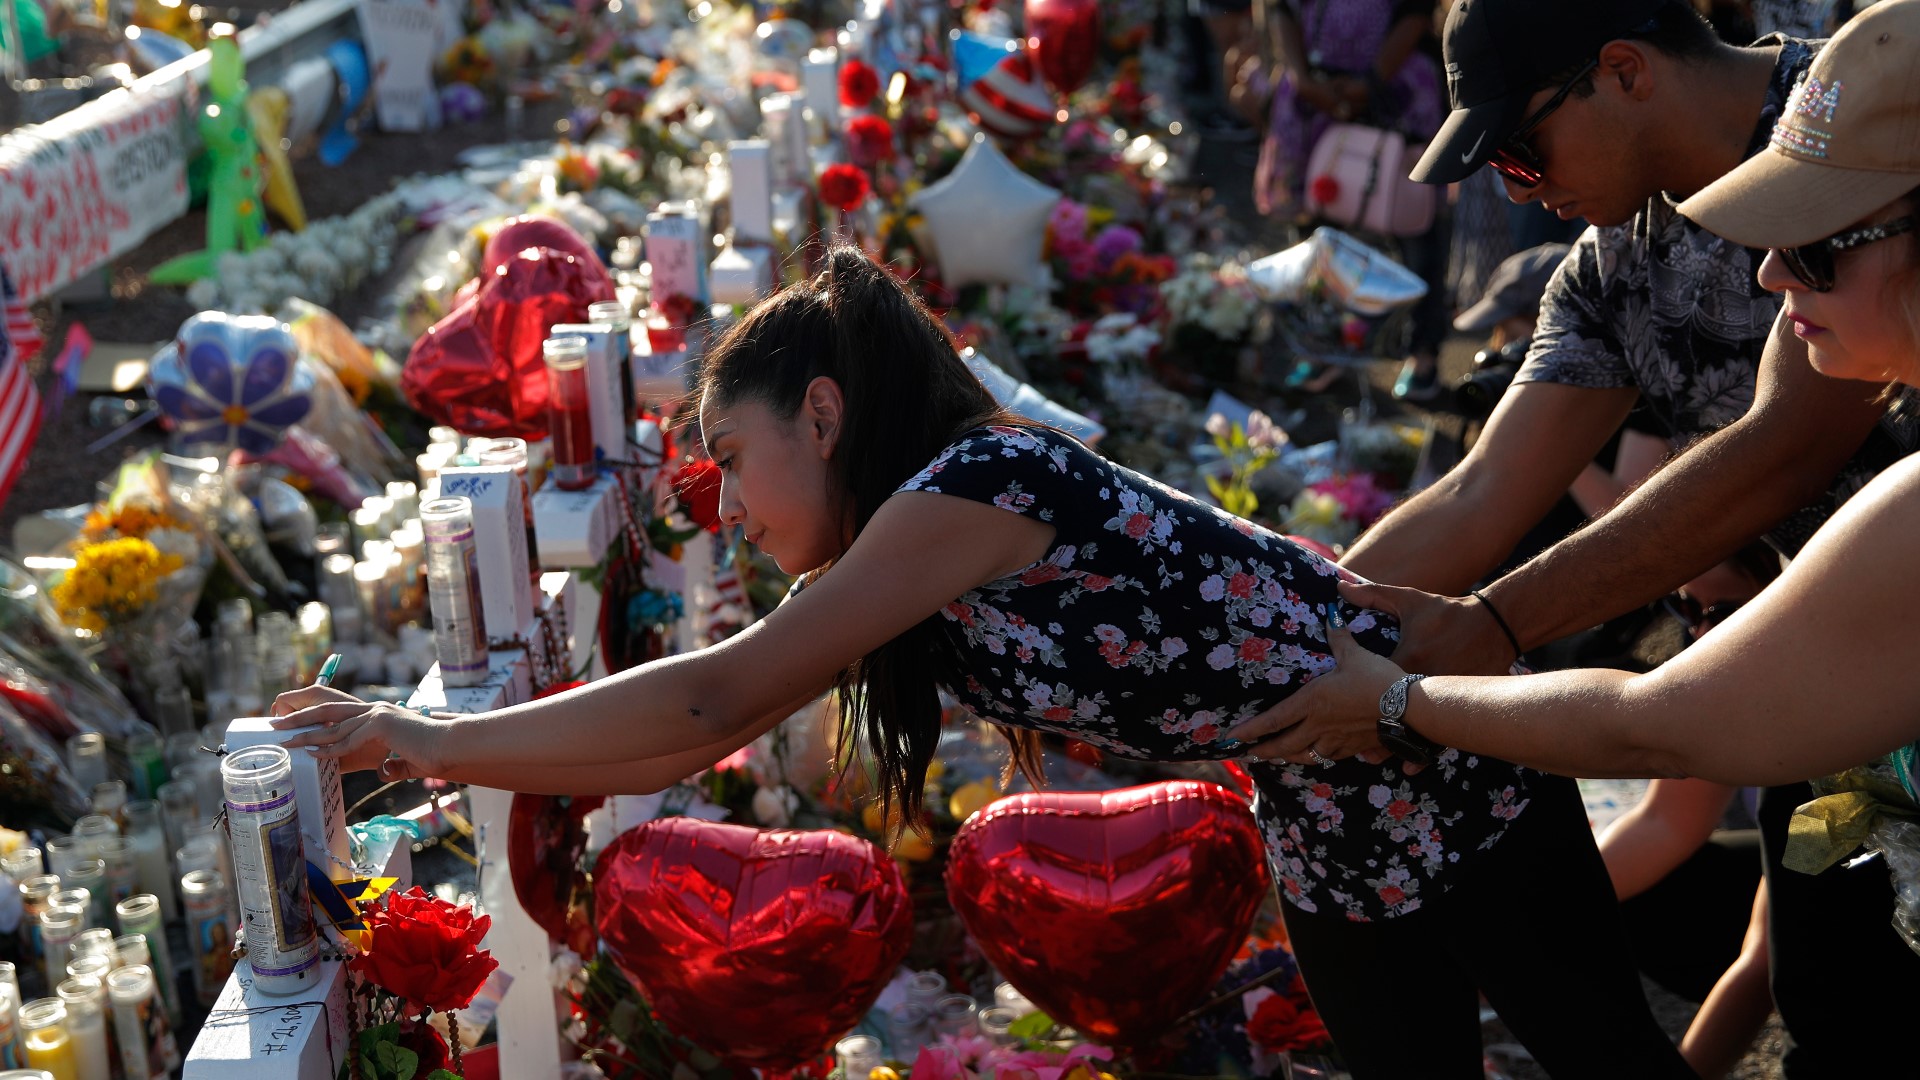 It has been a difficult week for many families because of the deadly mass shootings, but Texans are doing what they do best trying to help each other. Here with advice on how to give wisely is Carlos Villalobos with the Better Business Bureau.